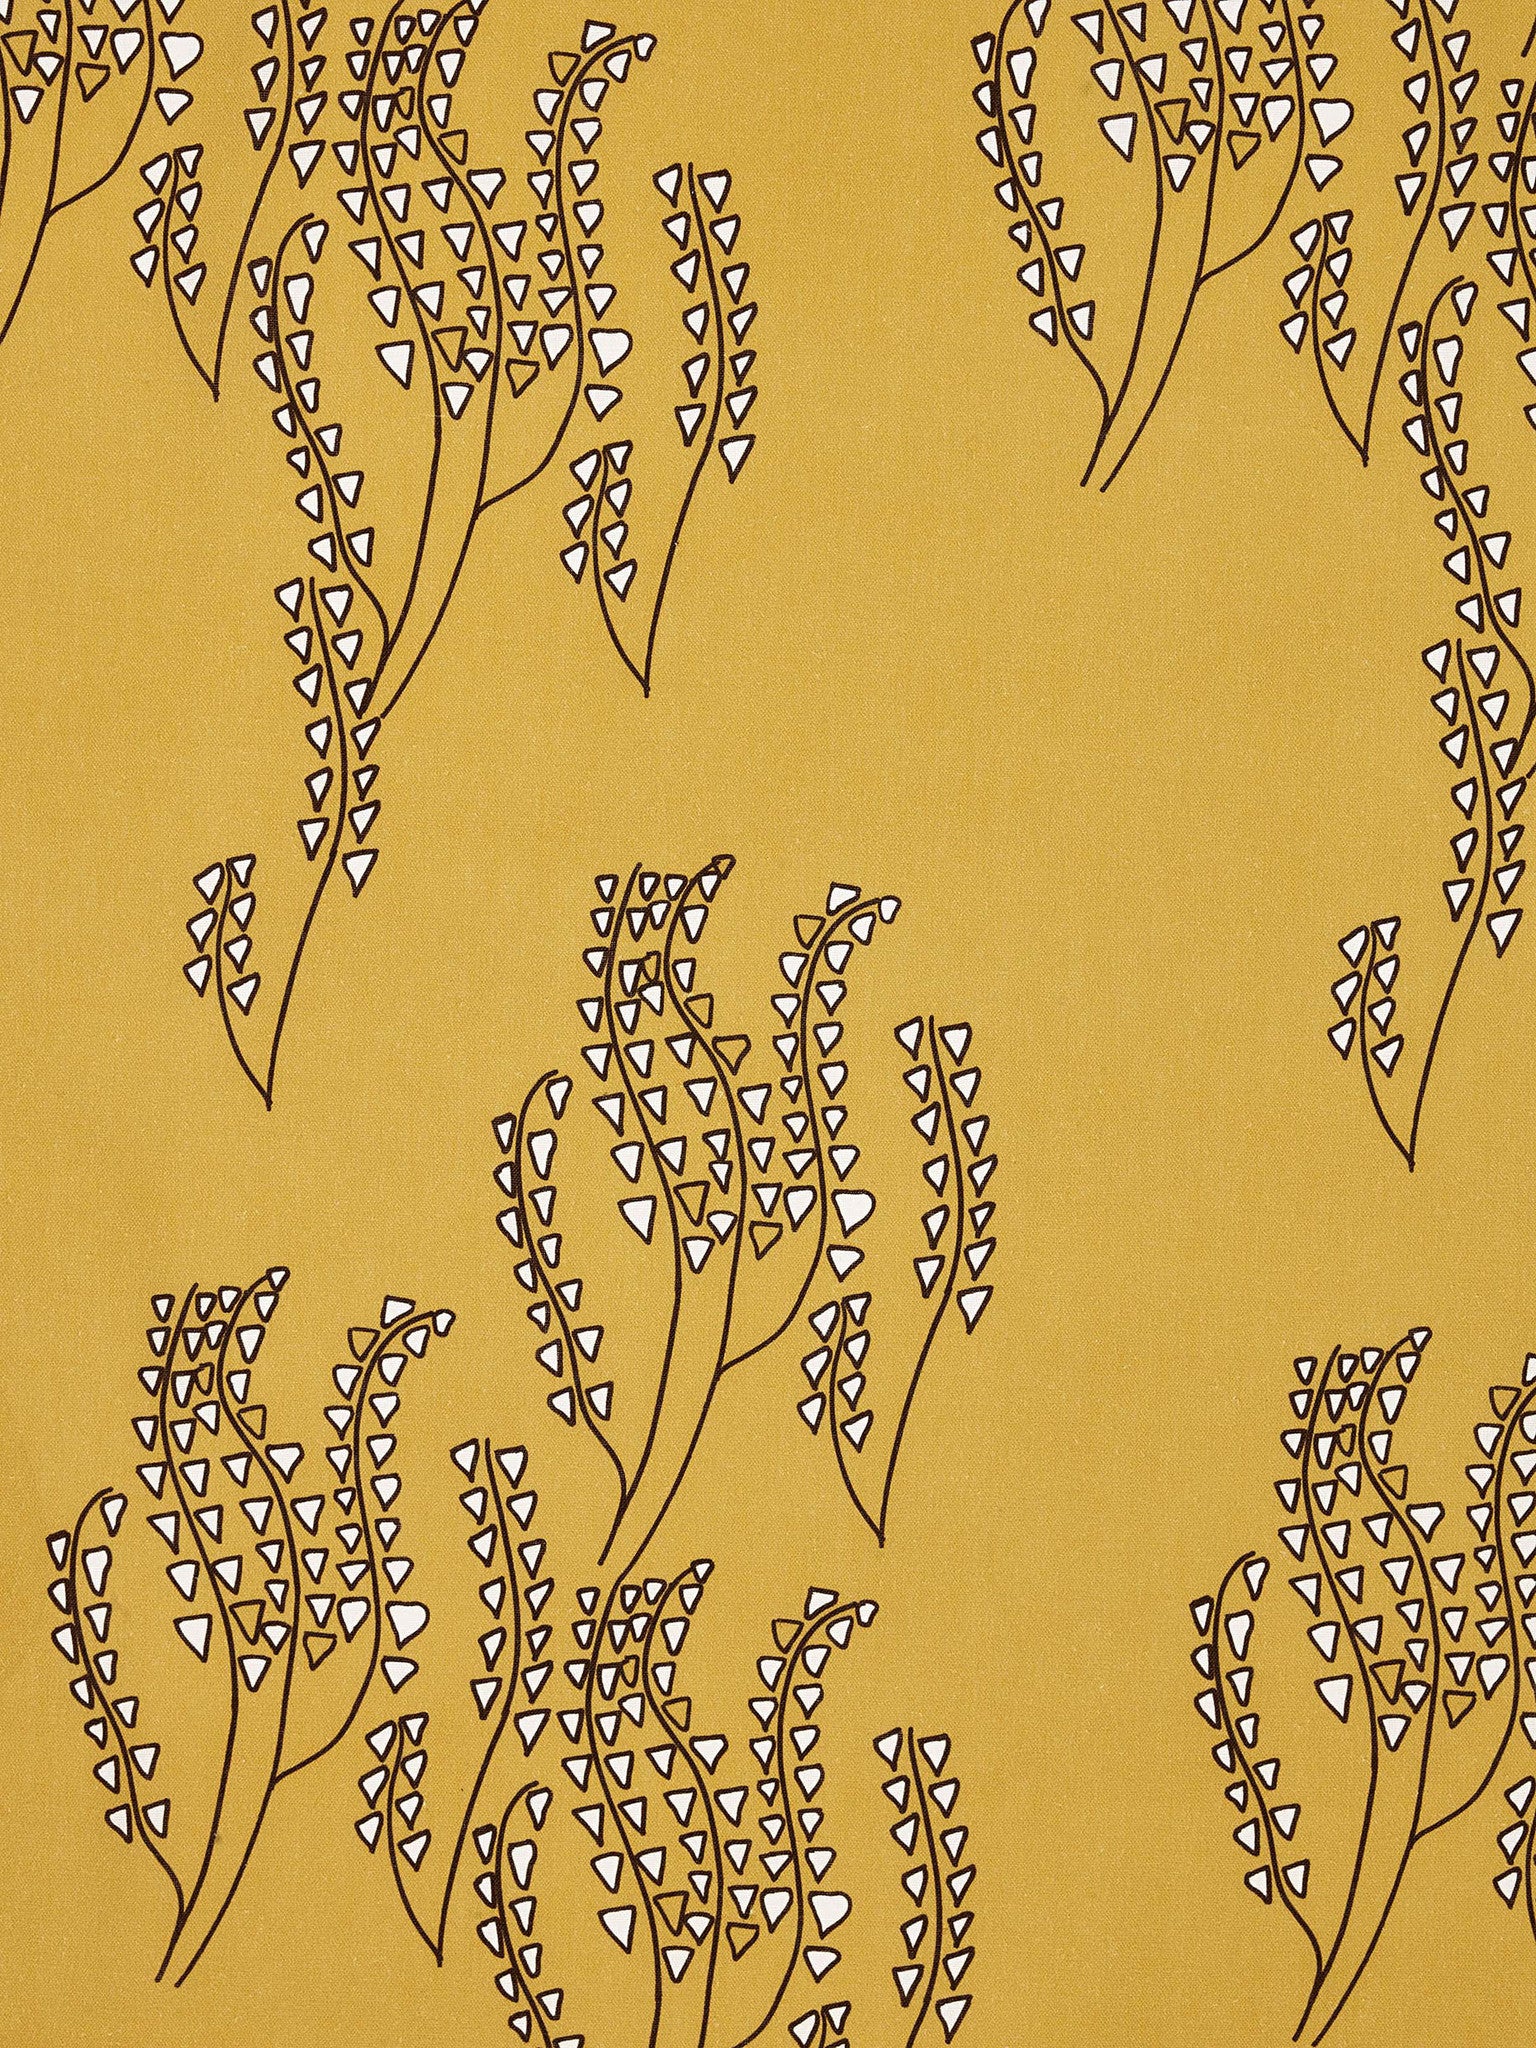 Yuma Graphic Grass Pattern Linen Cotton Canvas Home Interior Decor Fabric by the meter or yard for curtain, blinds or upholstery - Gold - dark -brown - ships from Canada (USA)